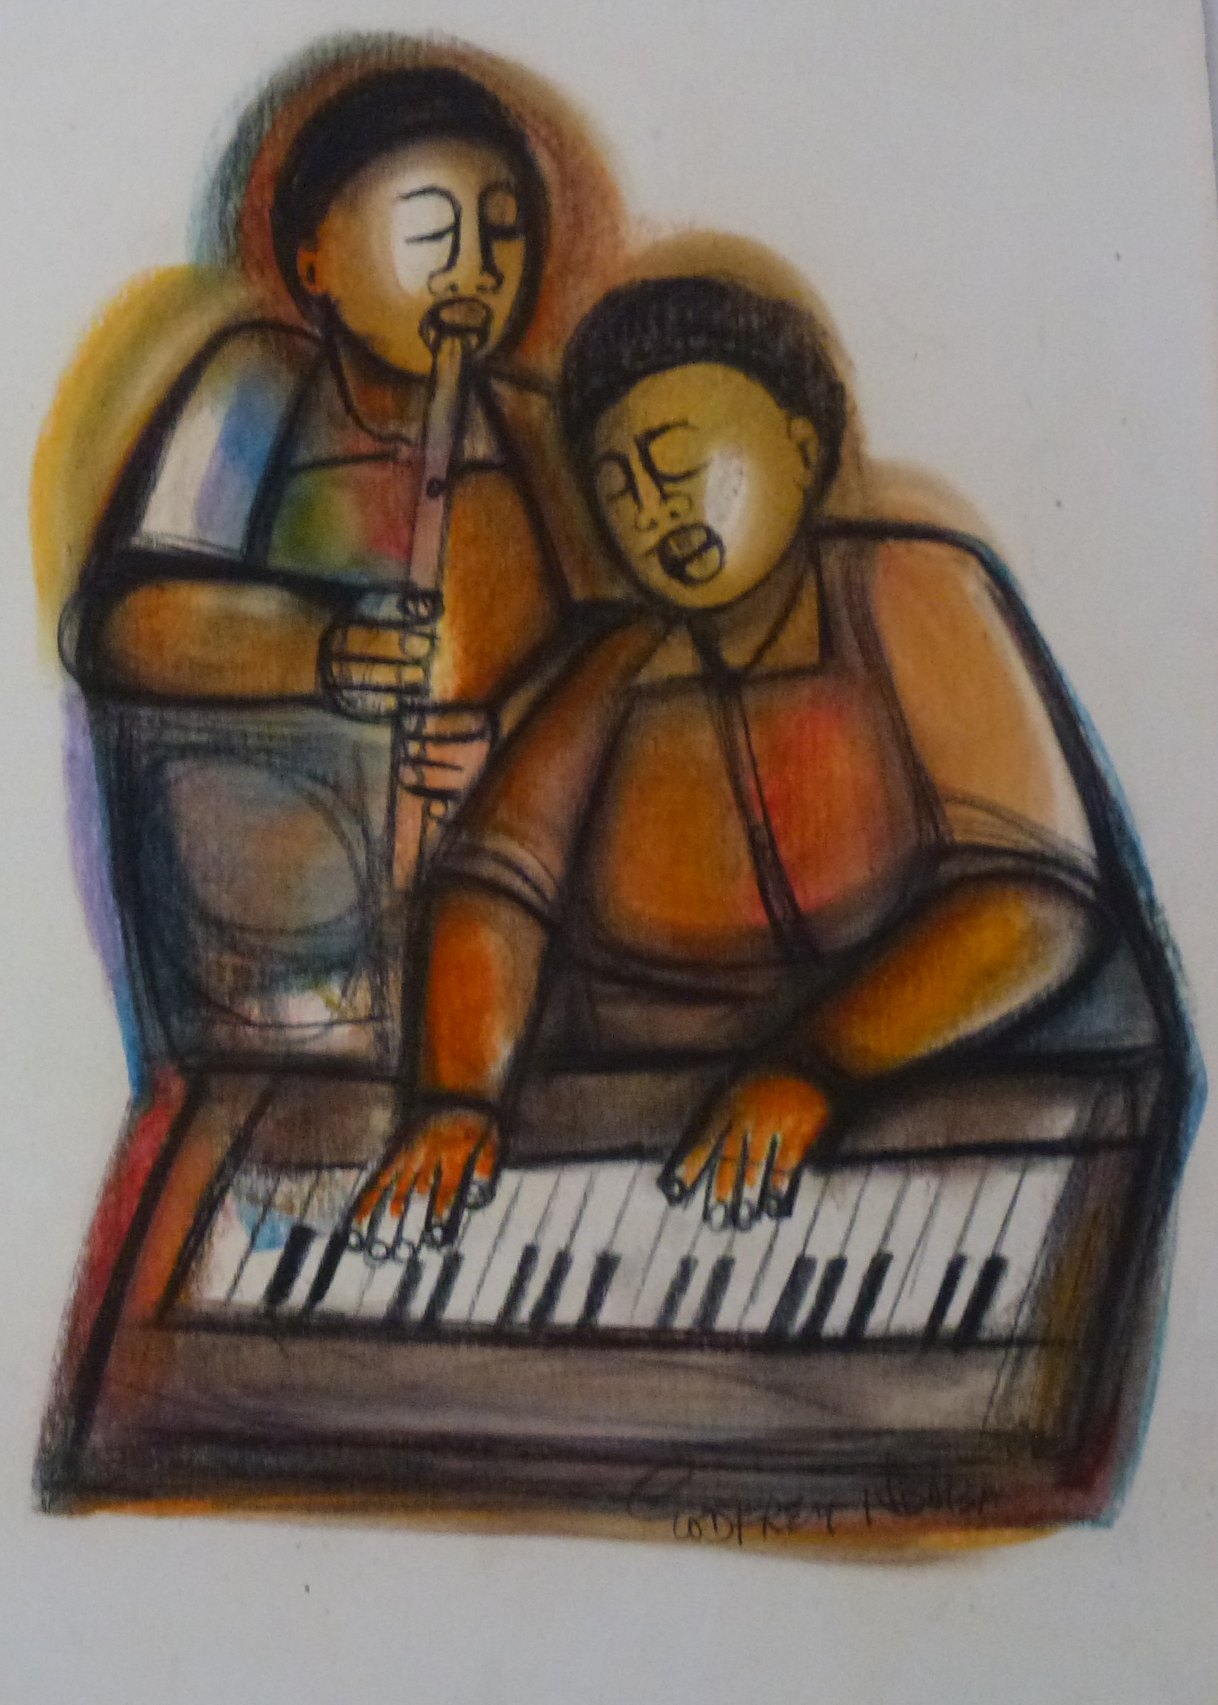 Flute And Organ Player